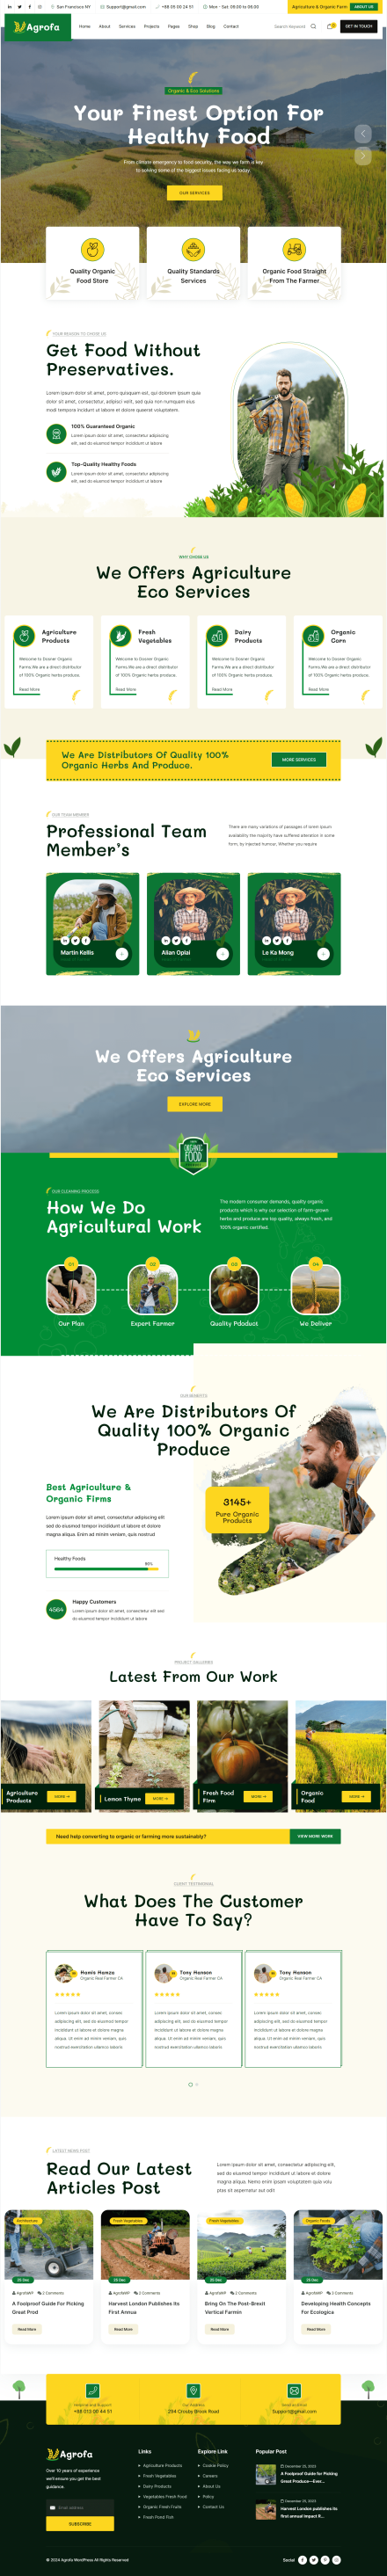 Agriculture Website Made by WordPress